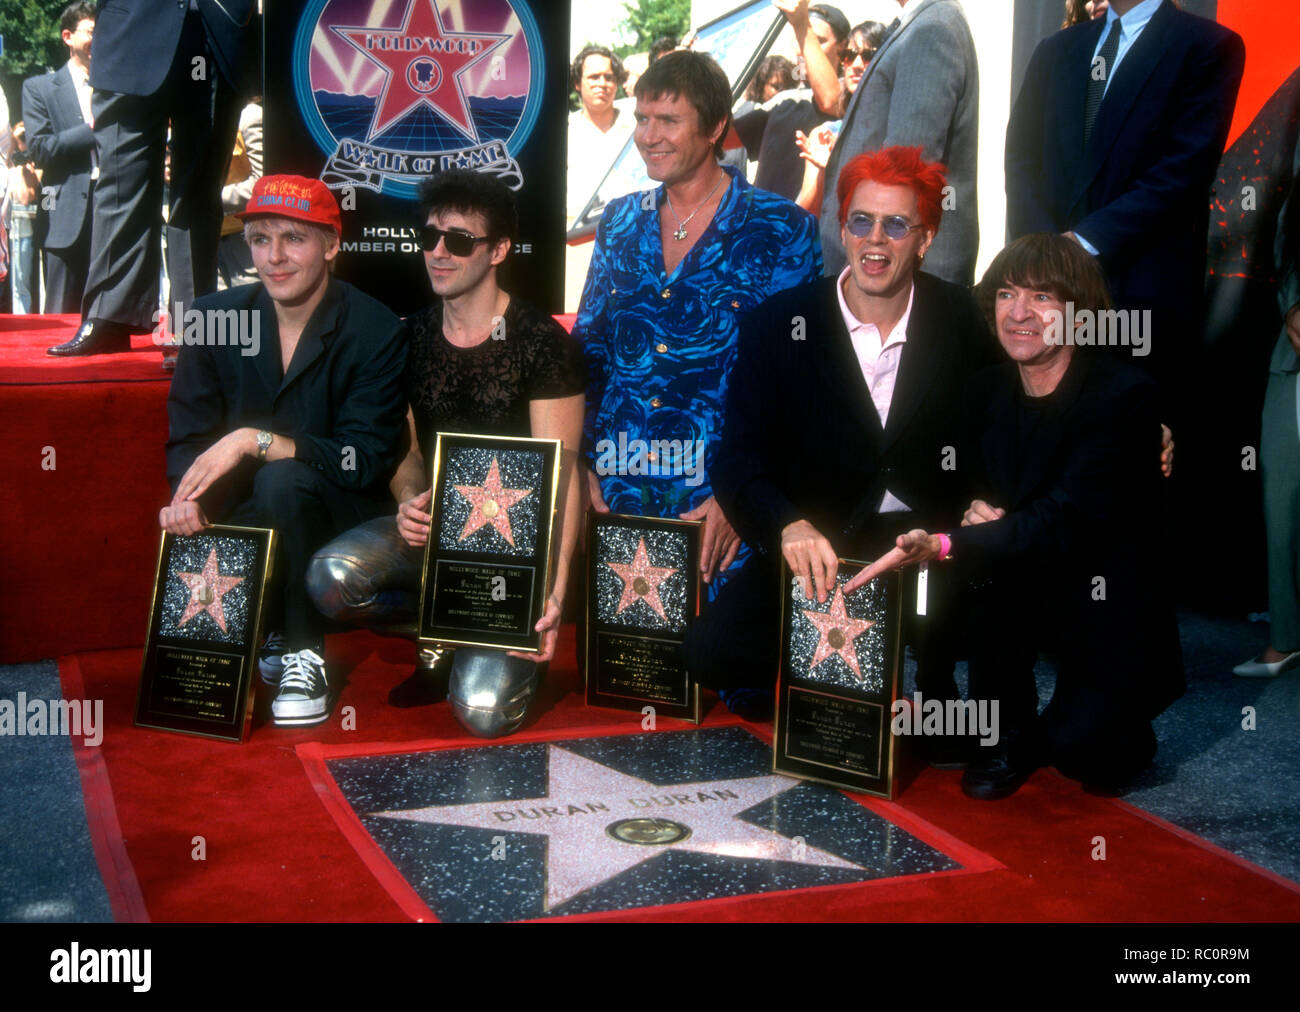 HOLLYWOOD, CA - AUGUST 23: Musicians/singers Nick Rhodes, Warren Cuccurullo, Simon Le Bon and John Taylor of Duran Duran and DJ Rodney Bingenheimer attend the Hollywood Walk of Fame Ceremony Honoring Duran Duran with a Walk of Fame Star on August 23, 1993 at 1770 Vine Street in Hollywood, California. Photo by Barry King/Alamy Stock Photo Stock Photo